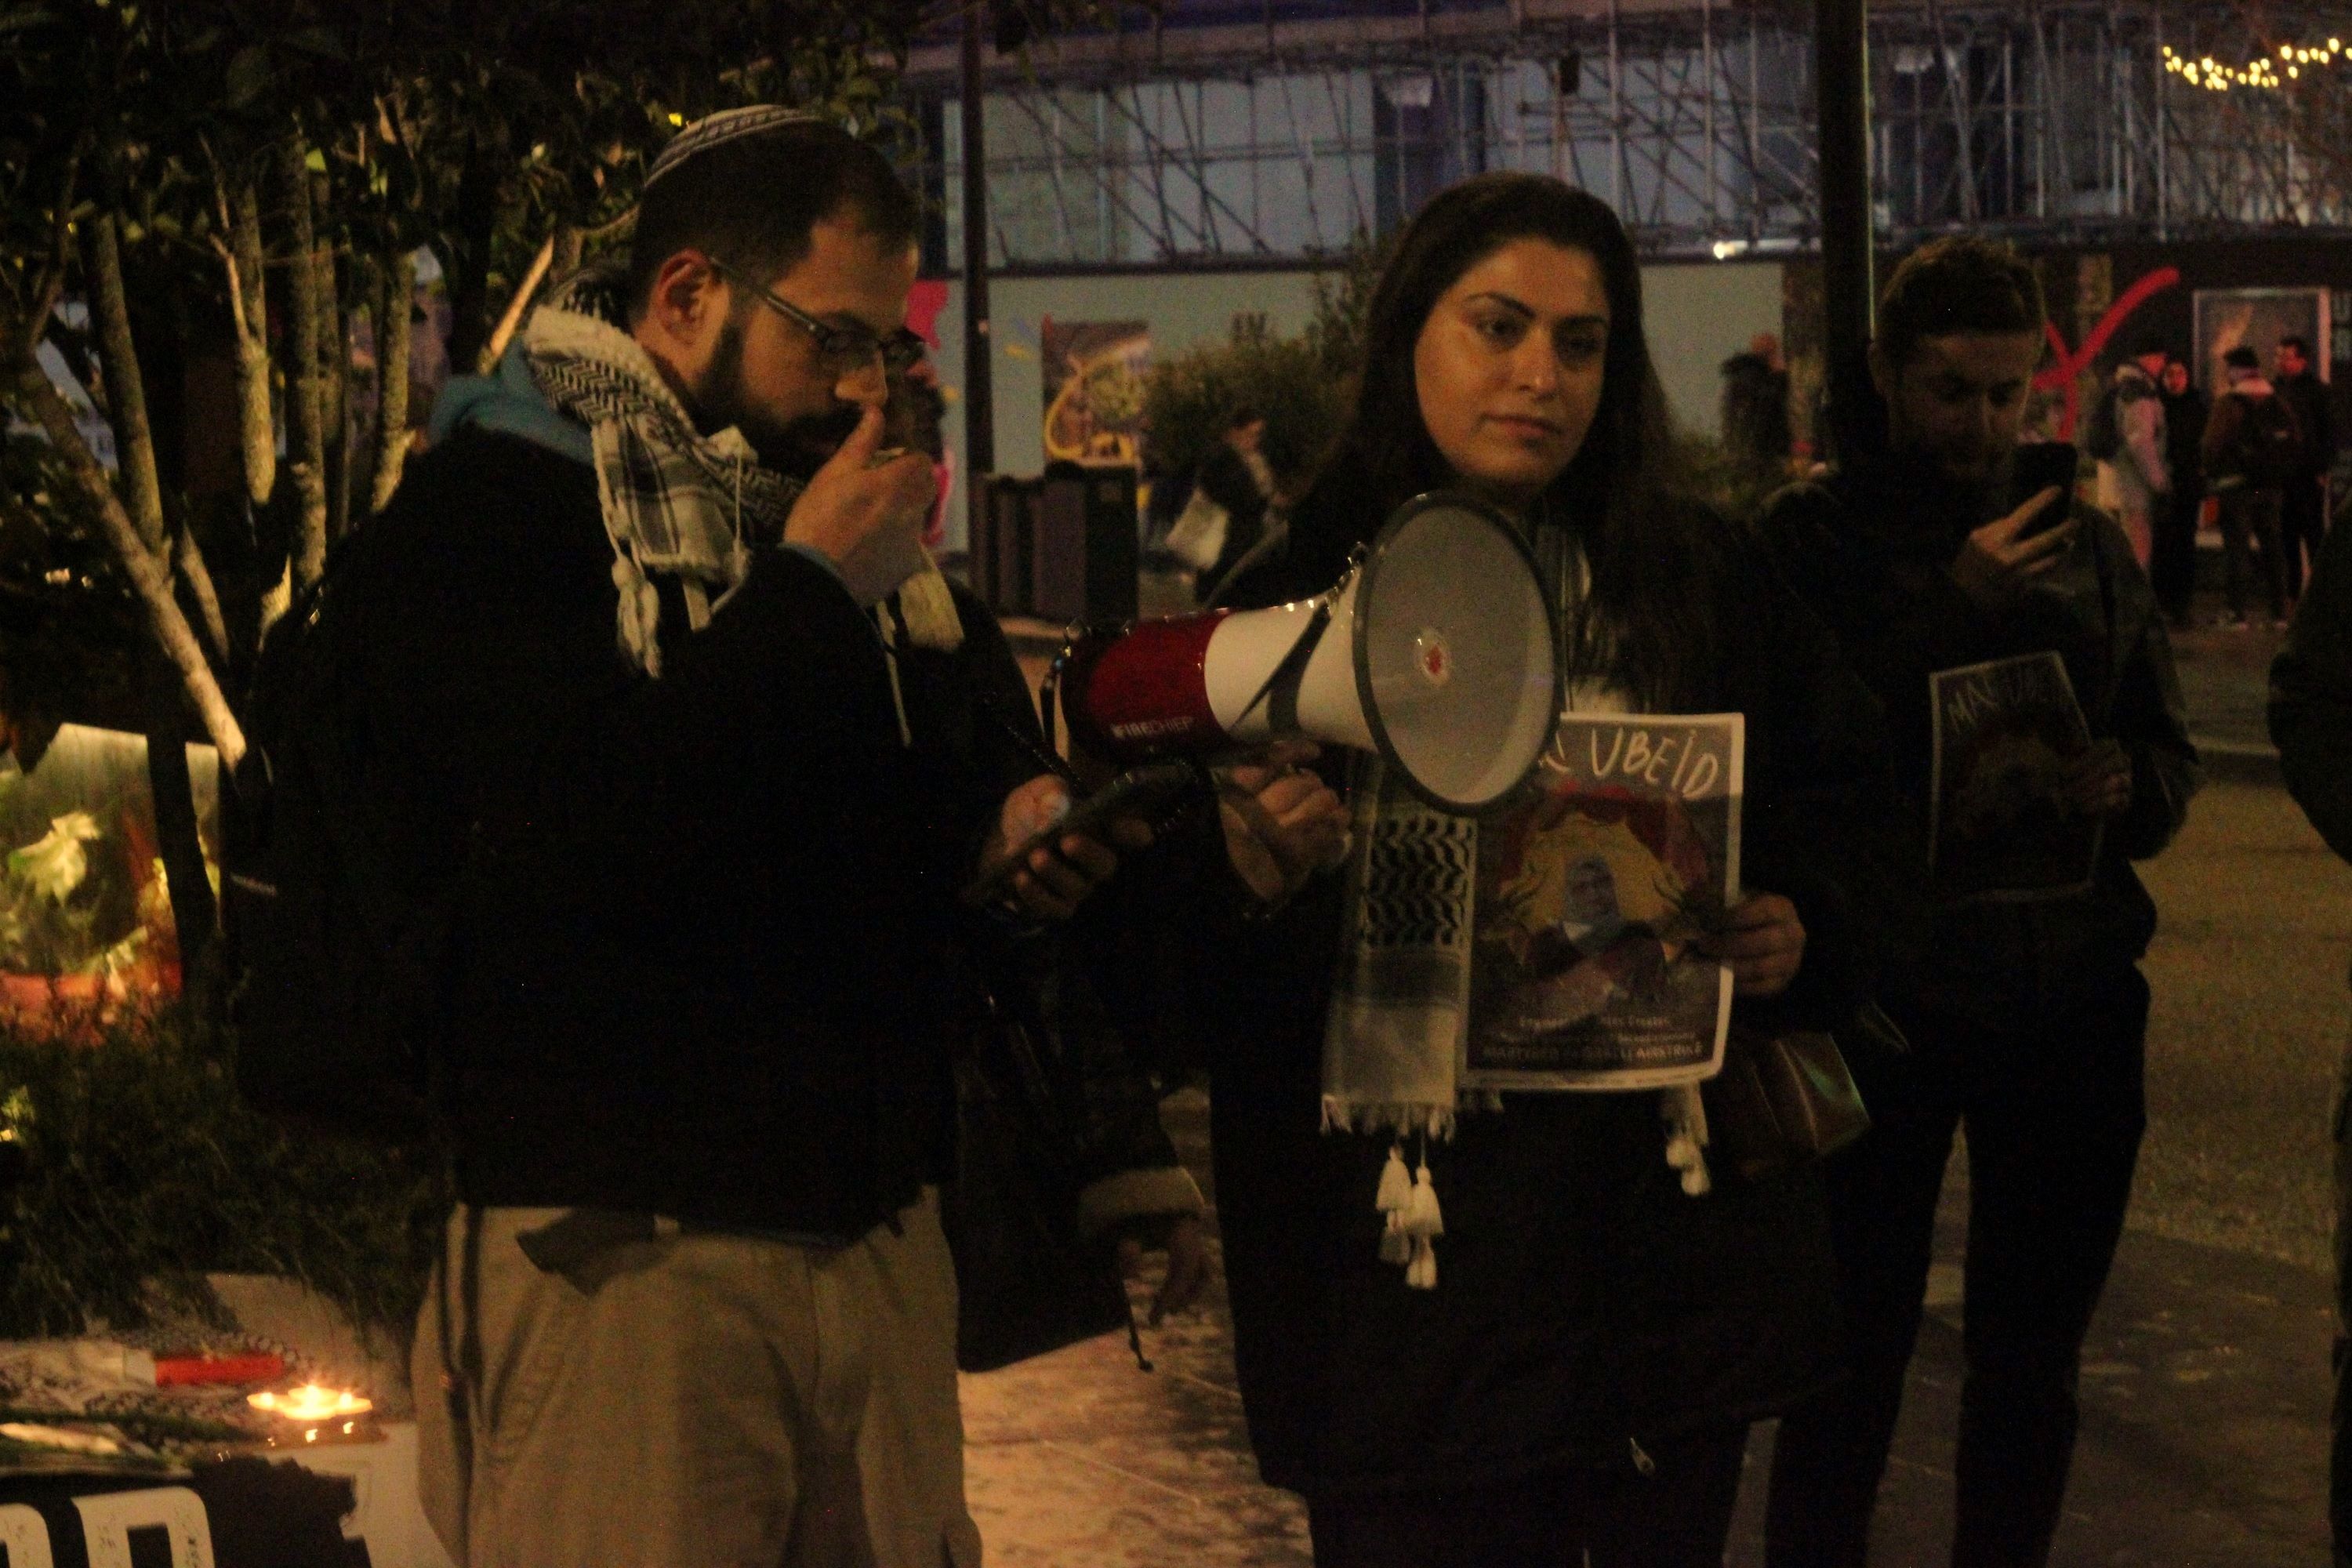 Campaigners speak at the vigil for Mai Ubeid outside Google's offices in London (MEE/Alex MacDonald)